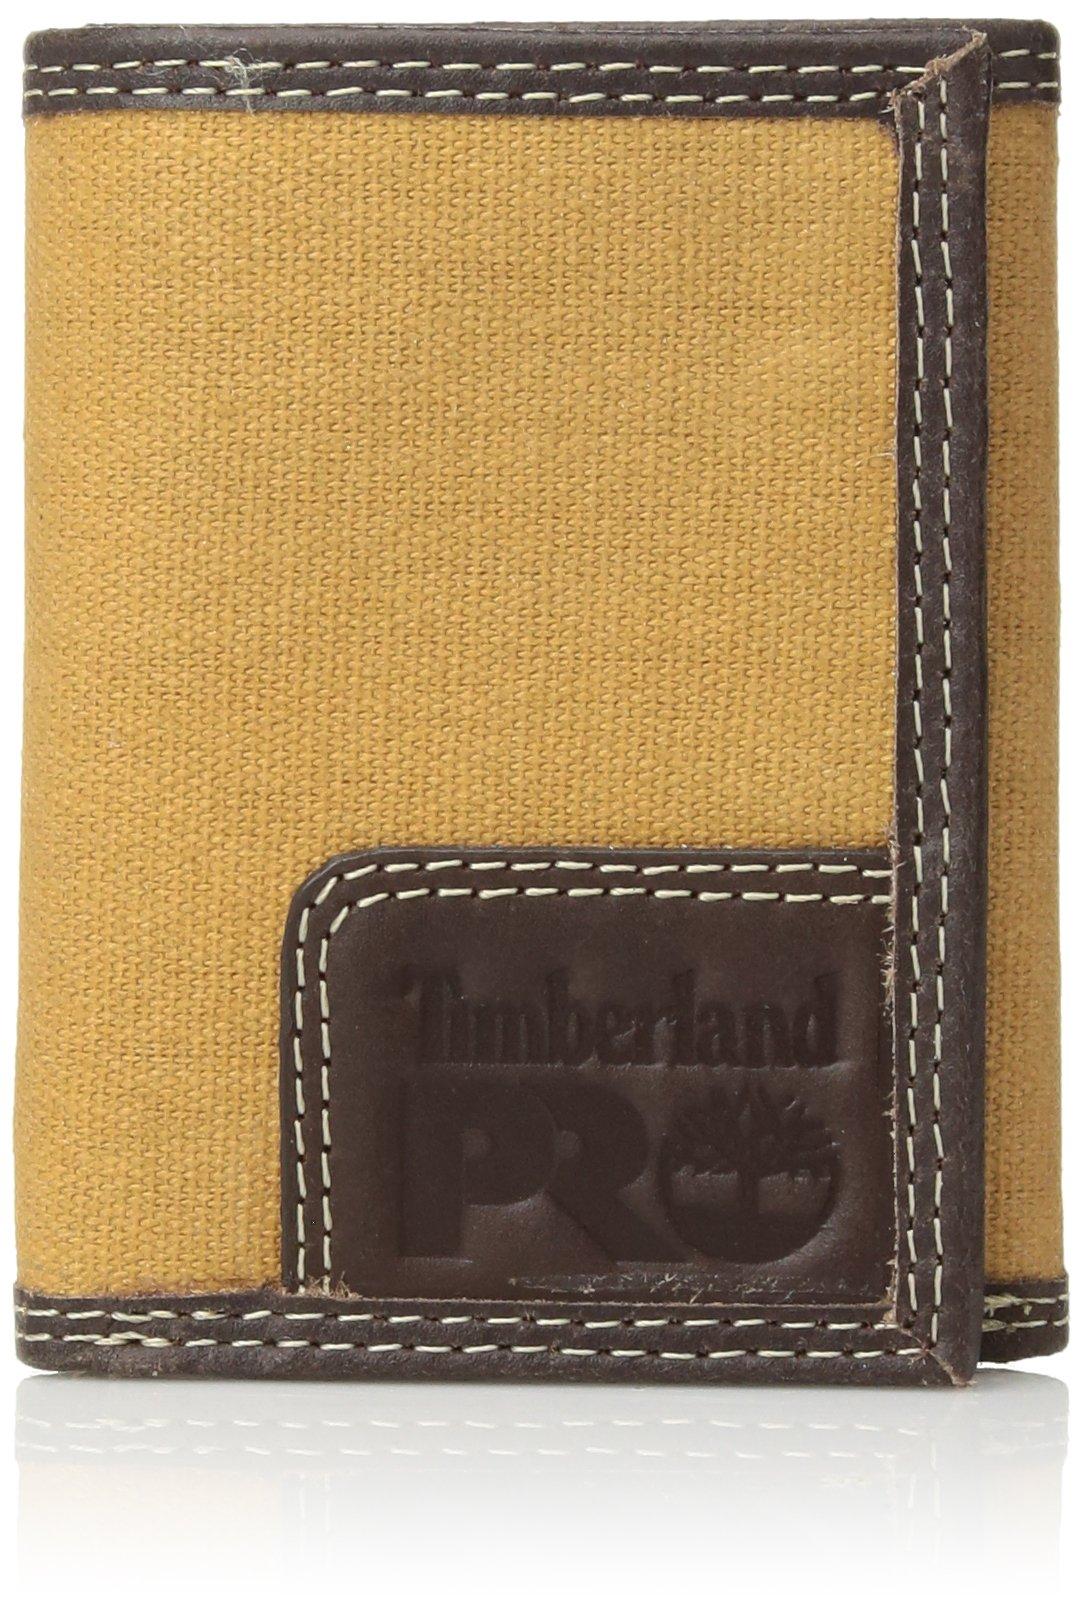 Timberland Pro Canvas Leather Rfid Trifold Wallet With Zippered Pocket for Men - Save 5% - Lyst